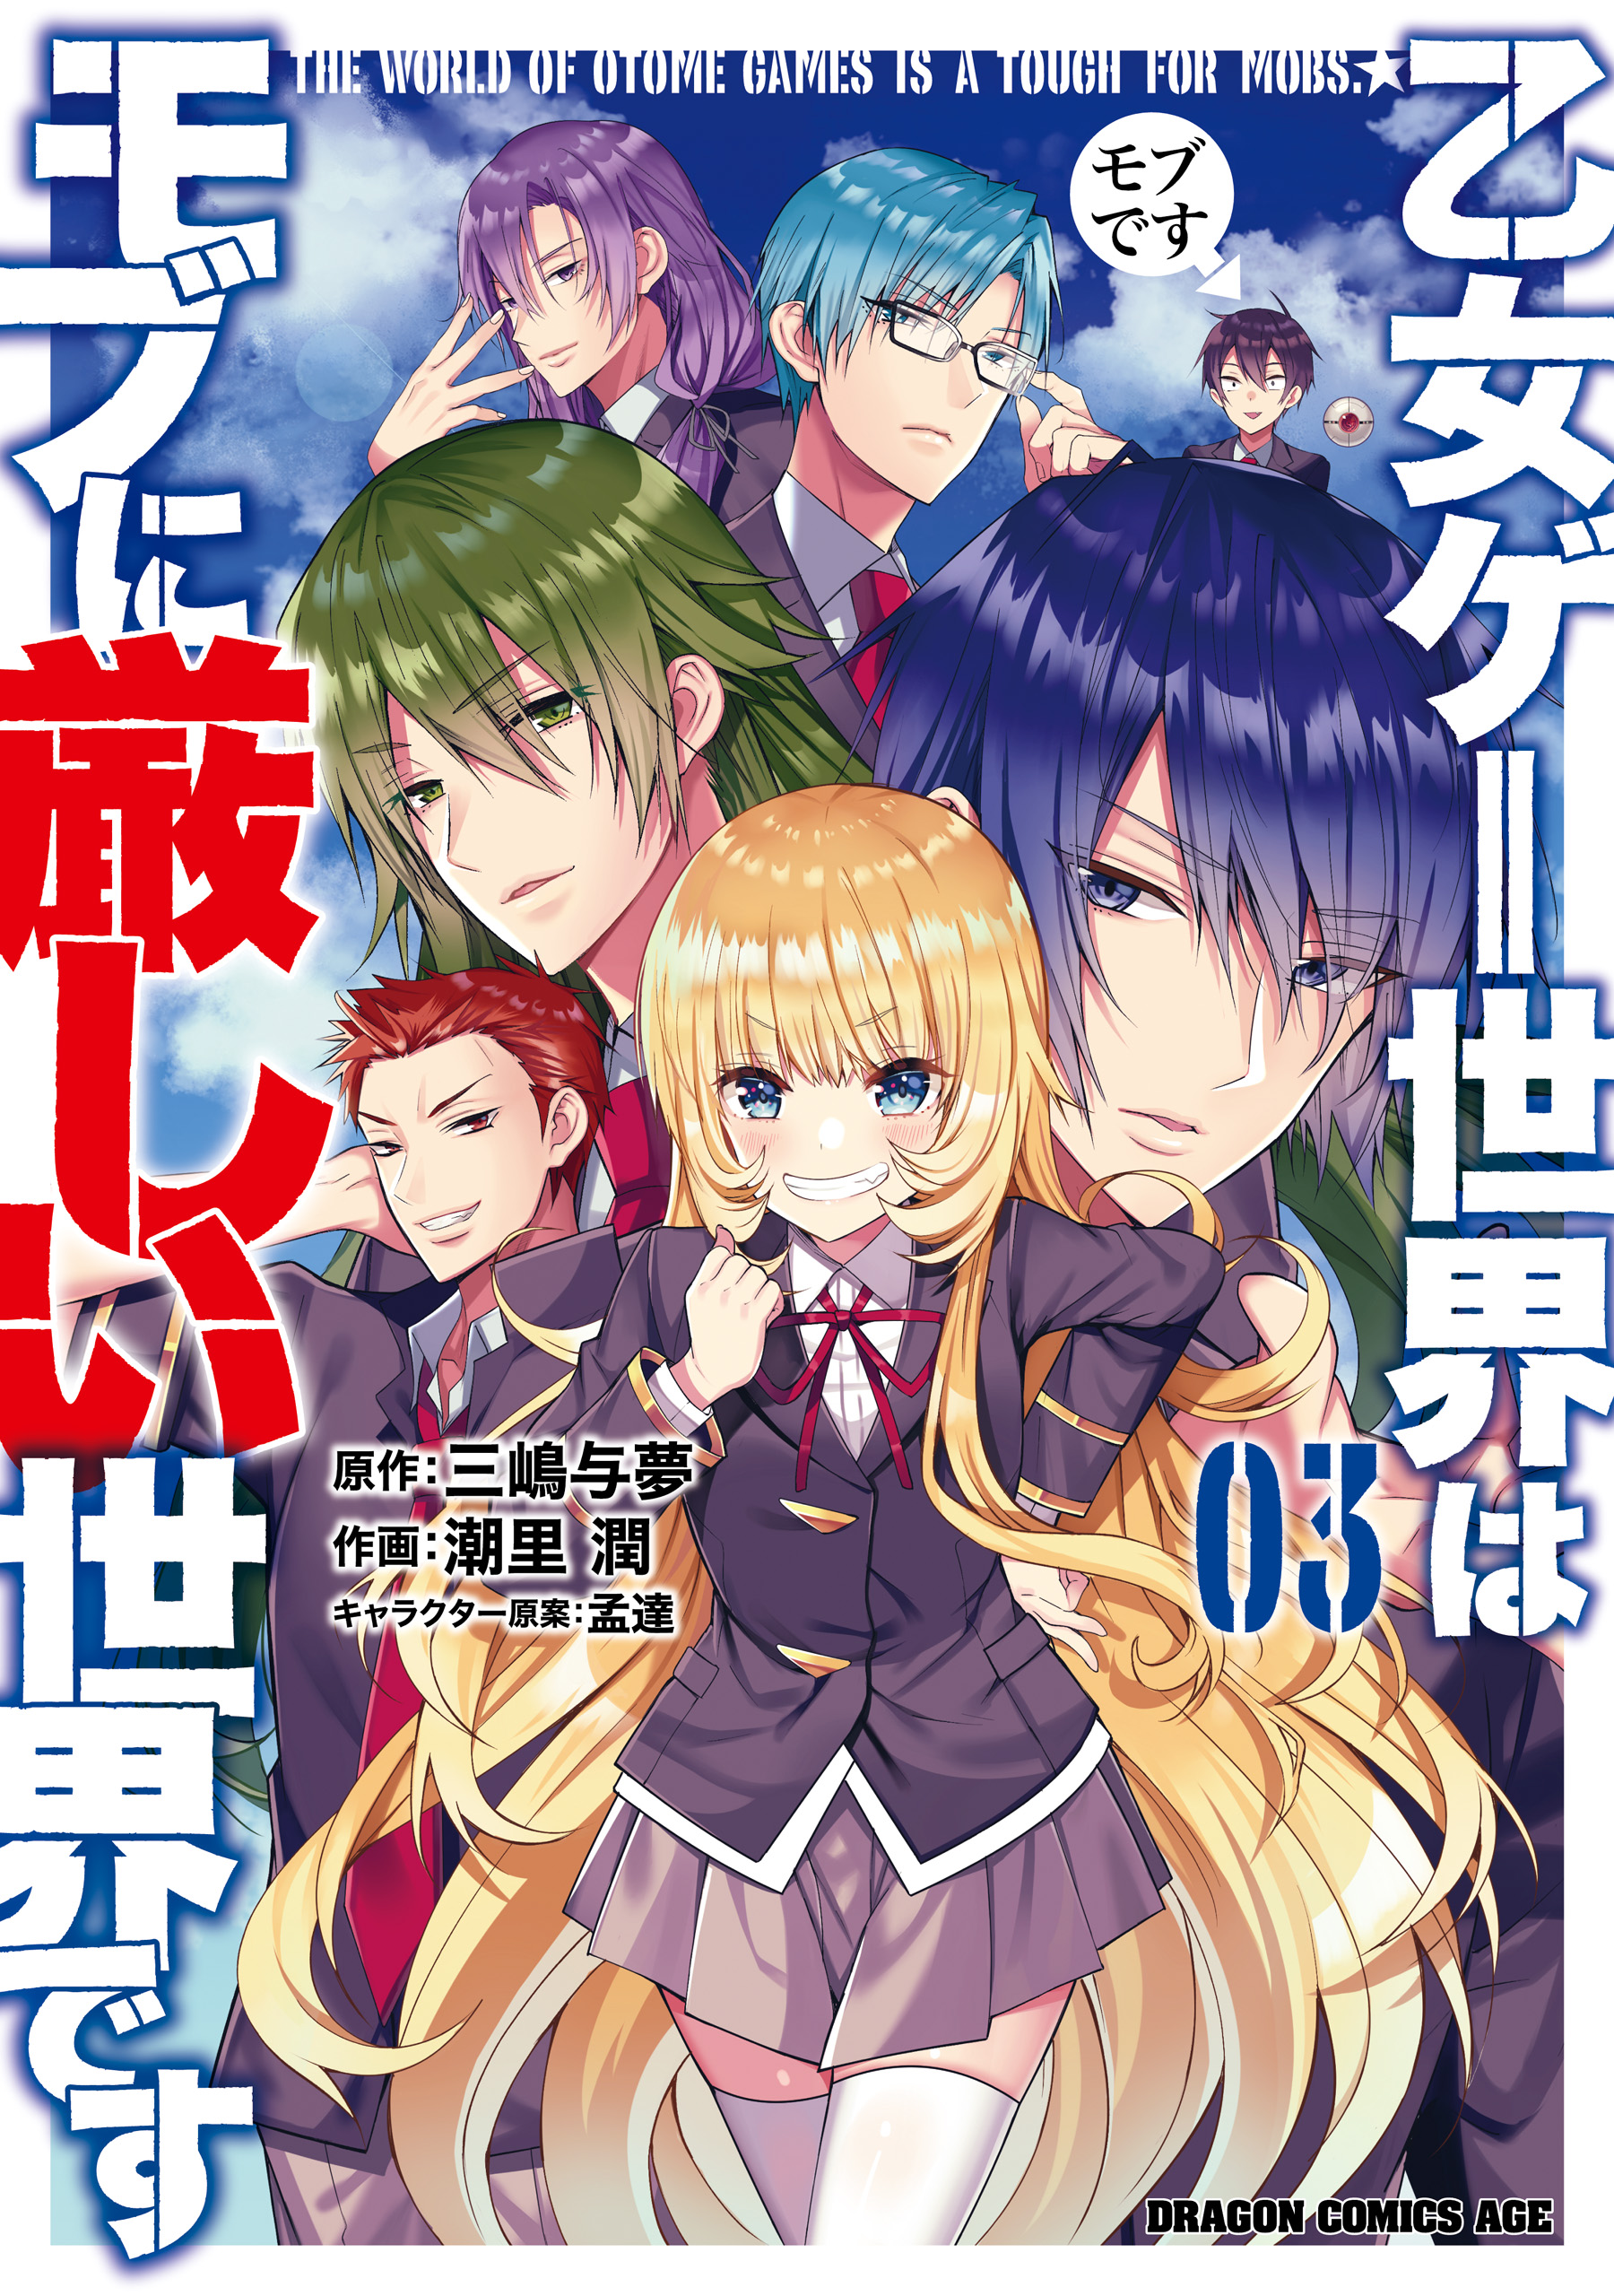 Manga Volume 2  The World of Otome Games is Tough for Mobs Wiki